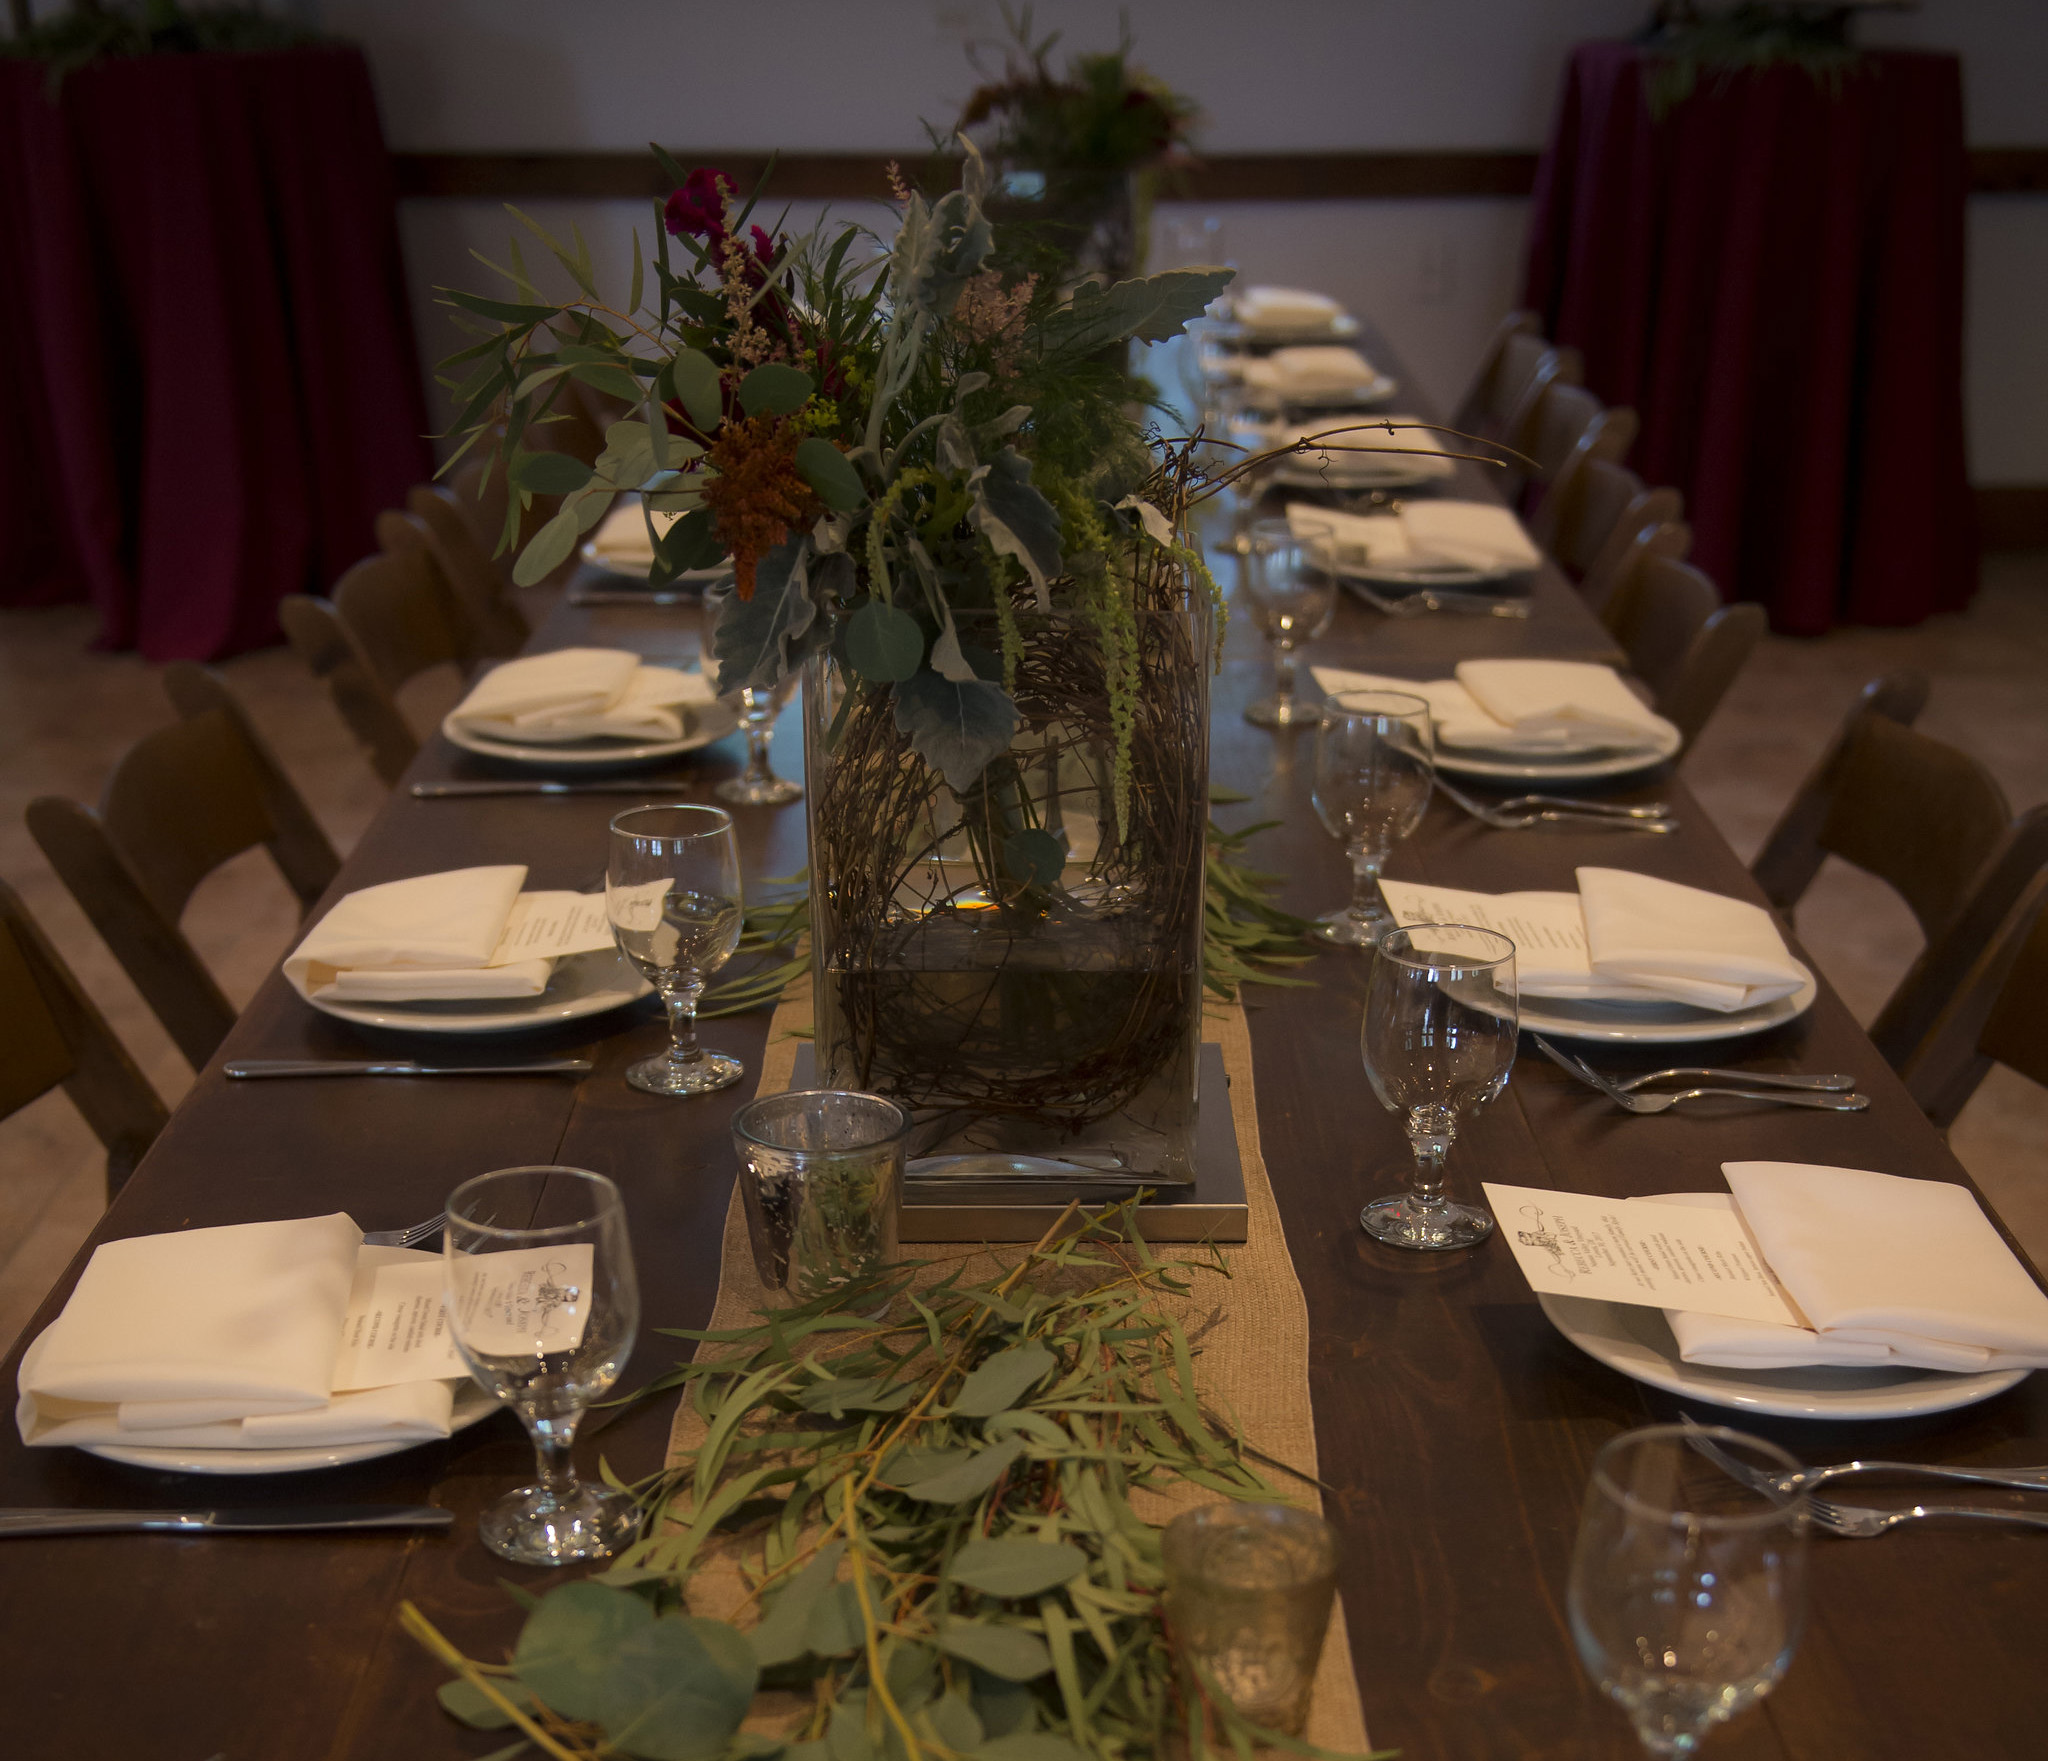 wood farm table with multiple place settings and flower center piece